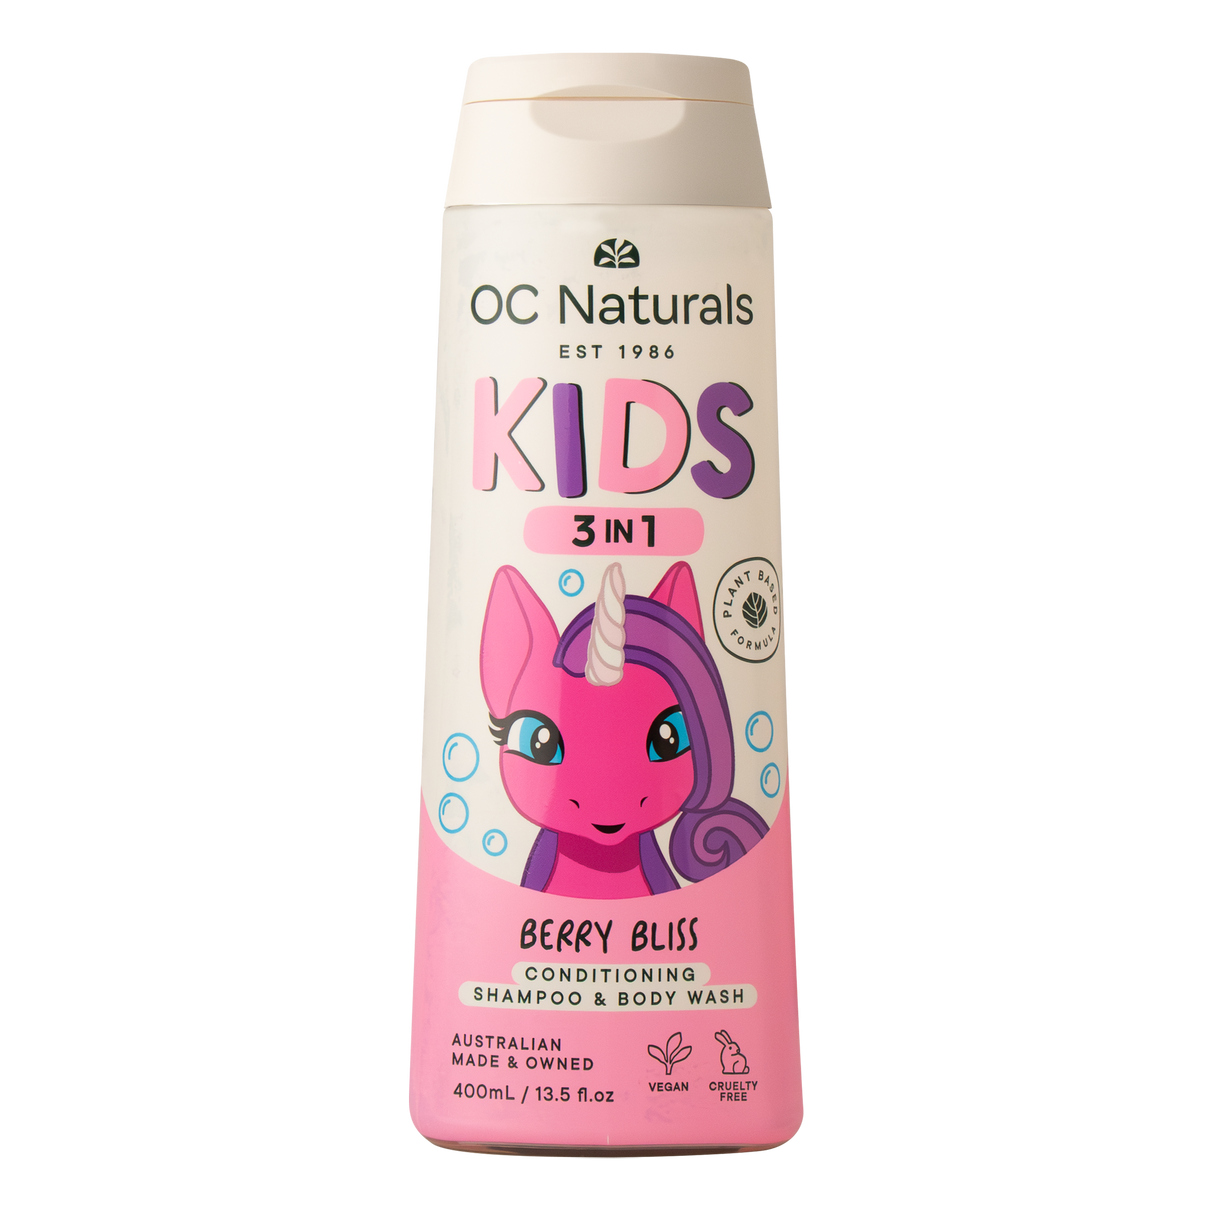 OC Kids 3in1 Berry Bliss Conditioning Shampoo & Body Wash 400ml